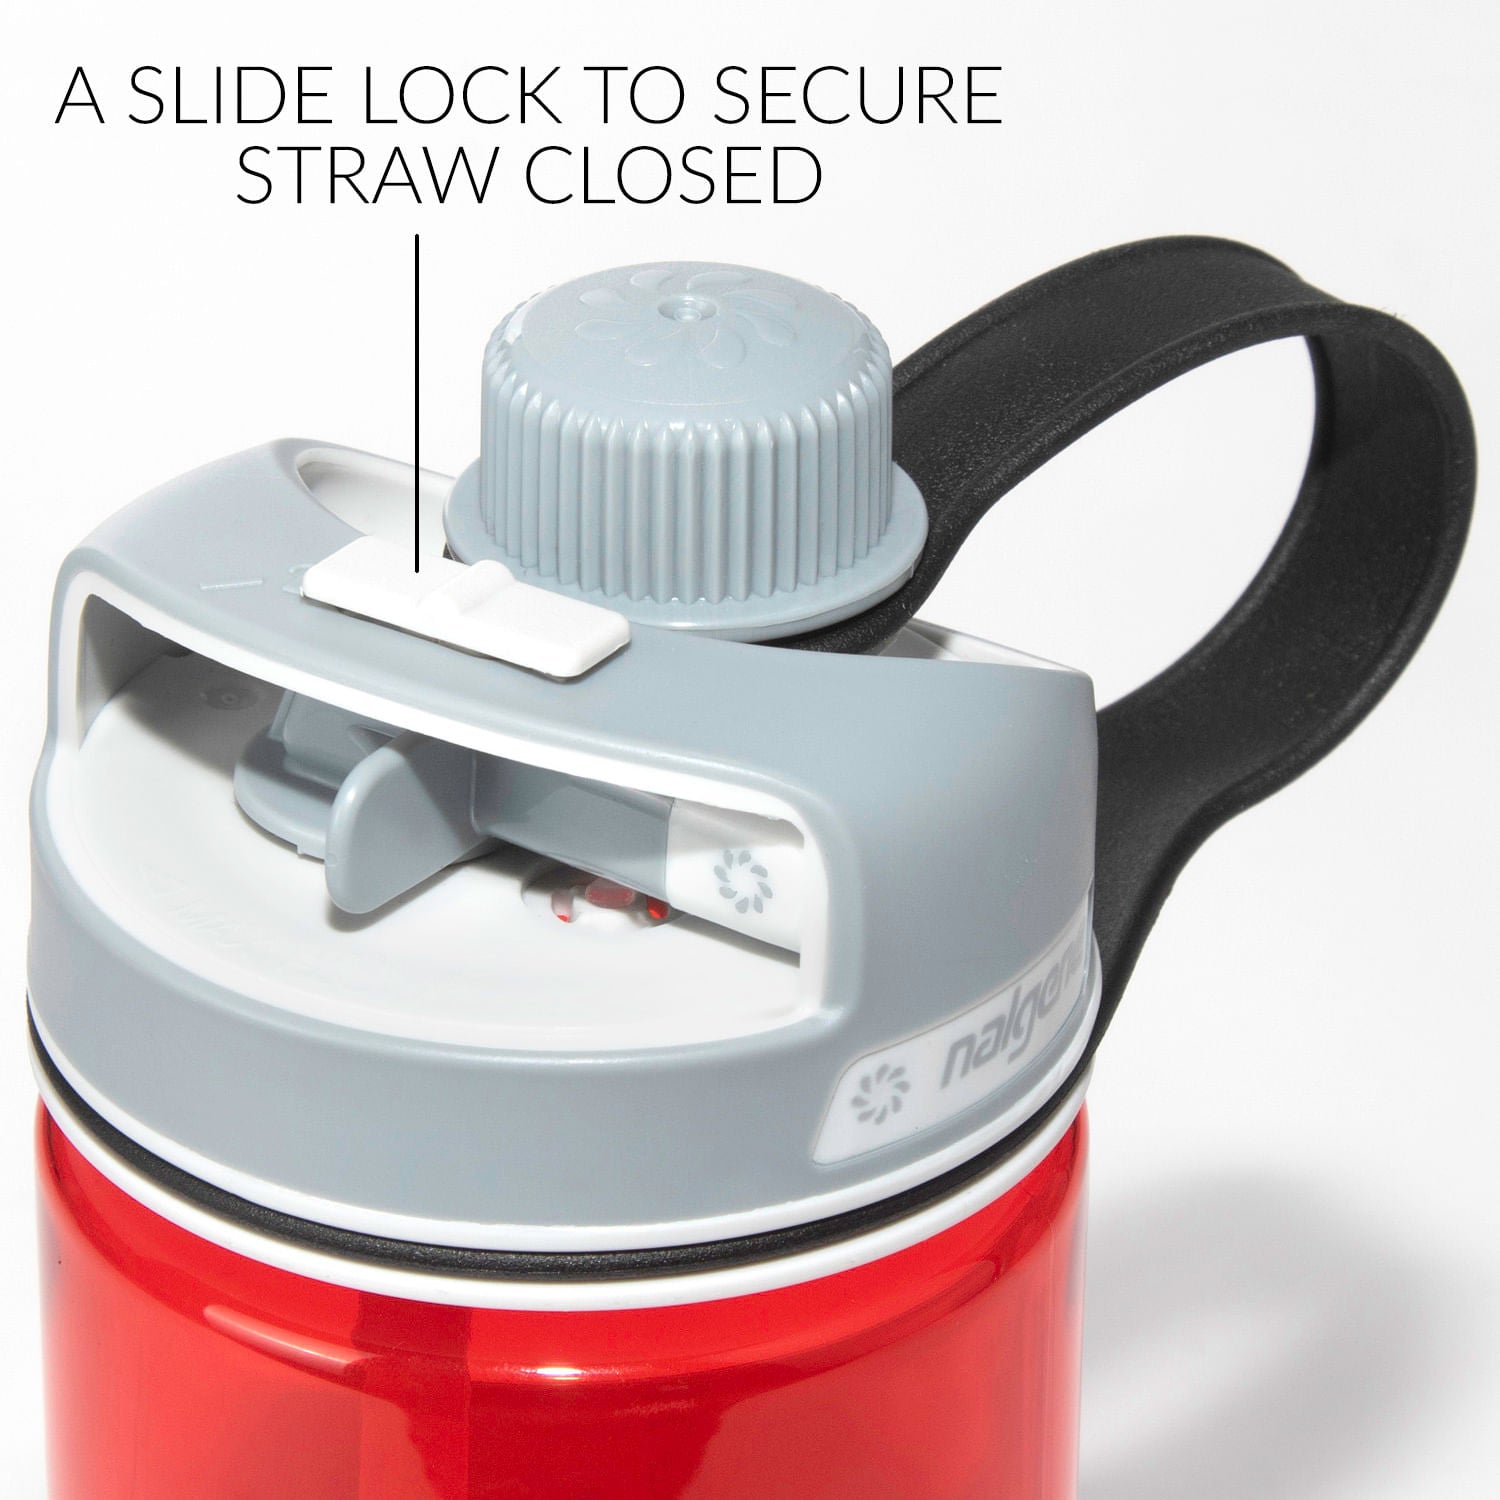 A slide lock to secure straw closed.